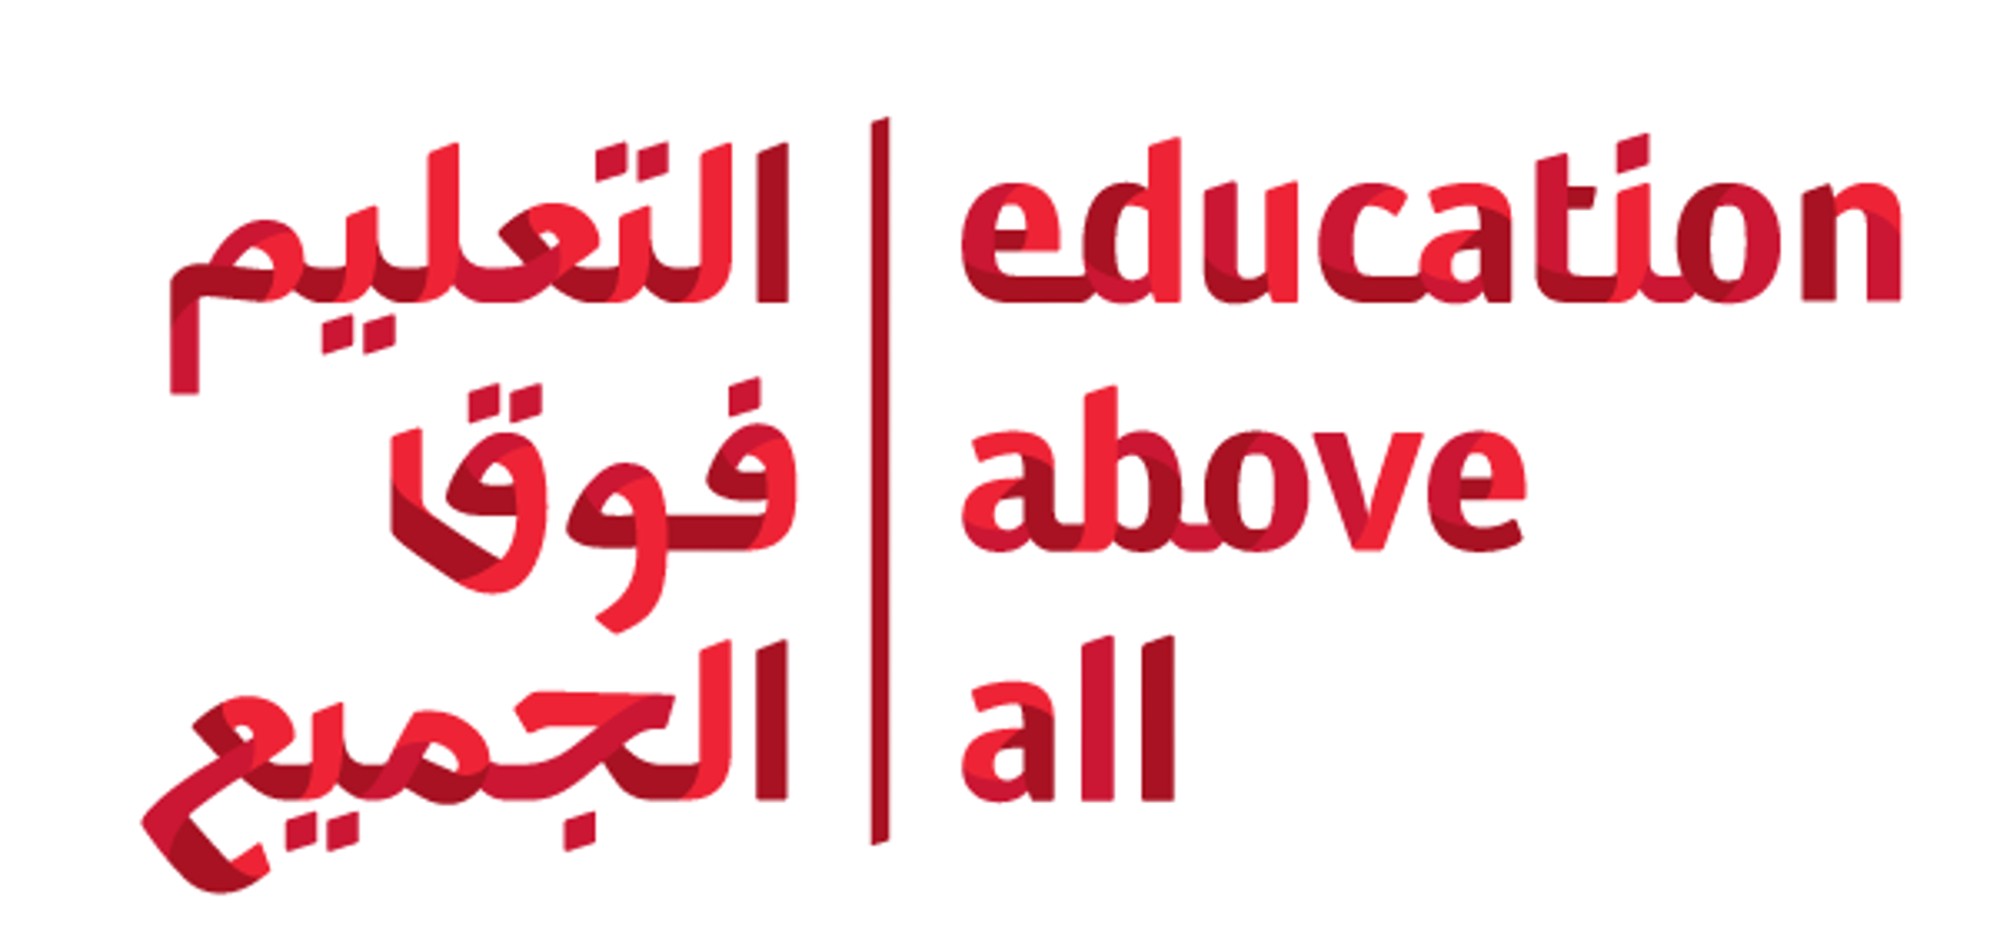 Education Above All Foundation launches "Achieving Goals" campaign